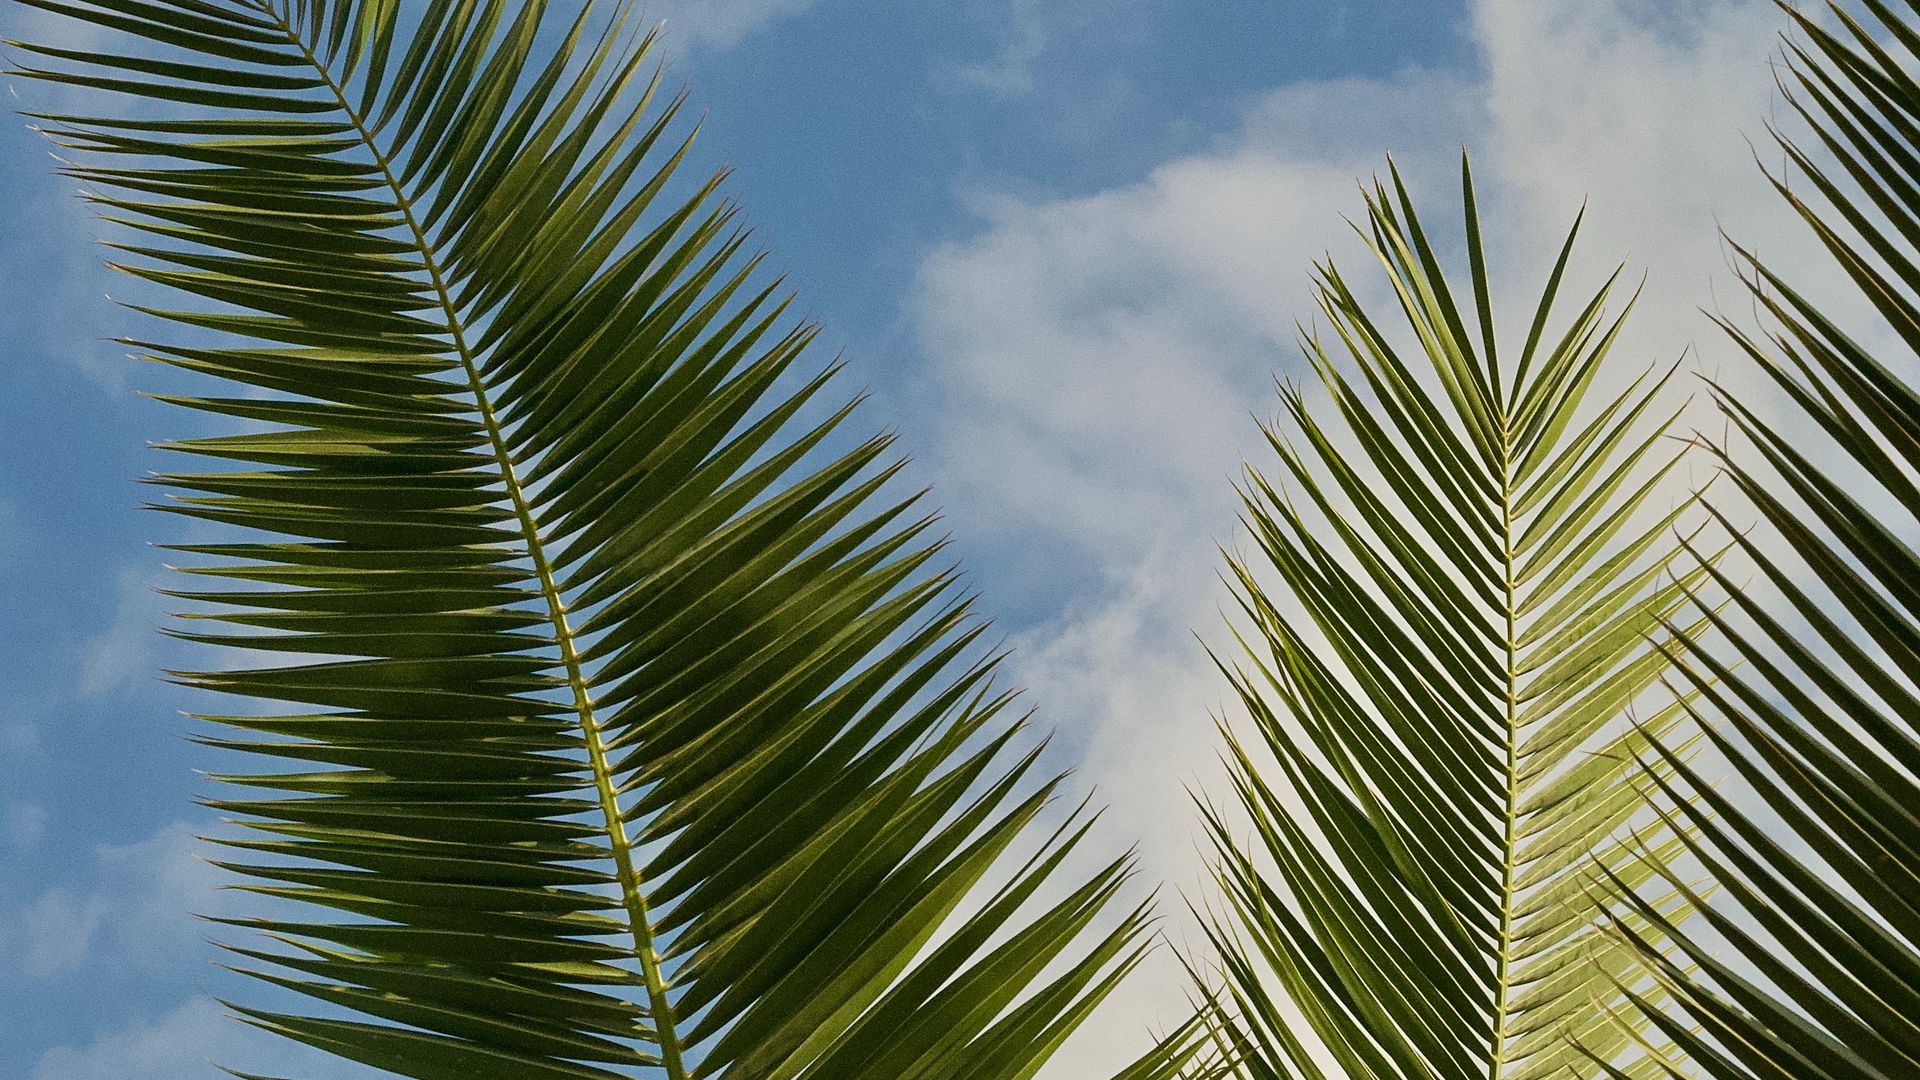 Download wallpaper 1920x1080 palm, leaves, branches, sky, clouds full ...